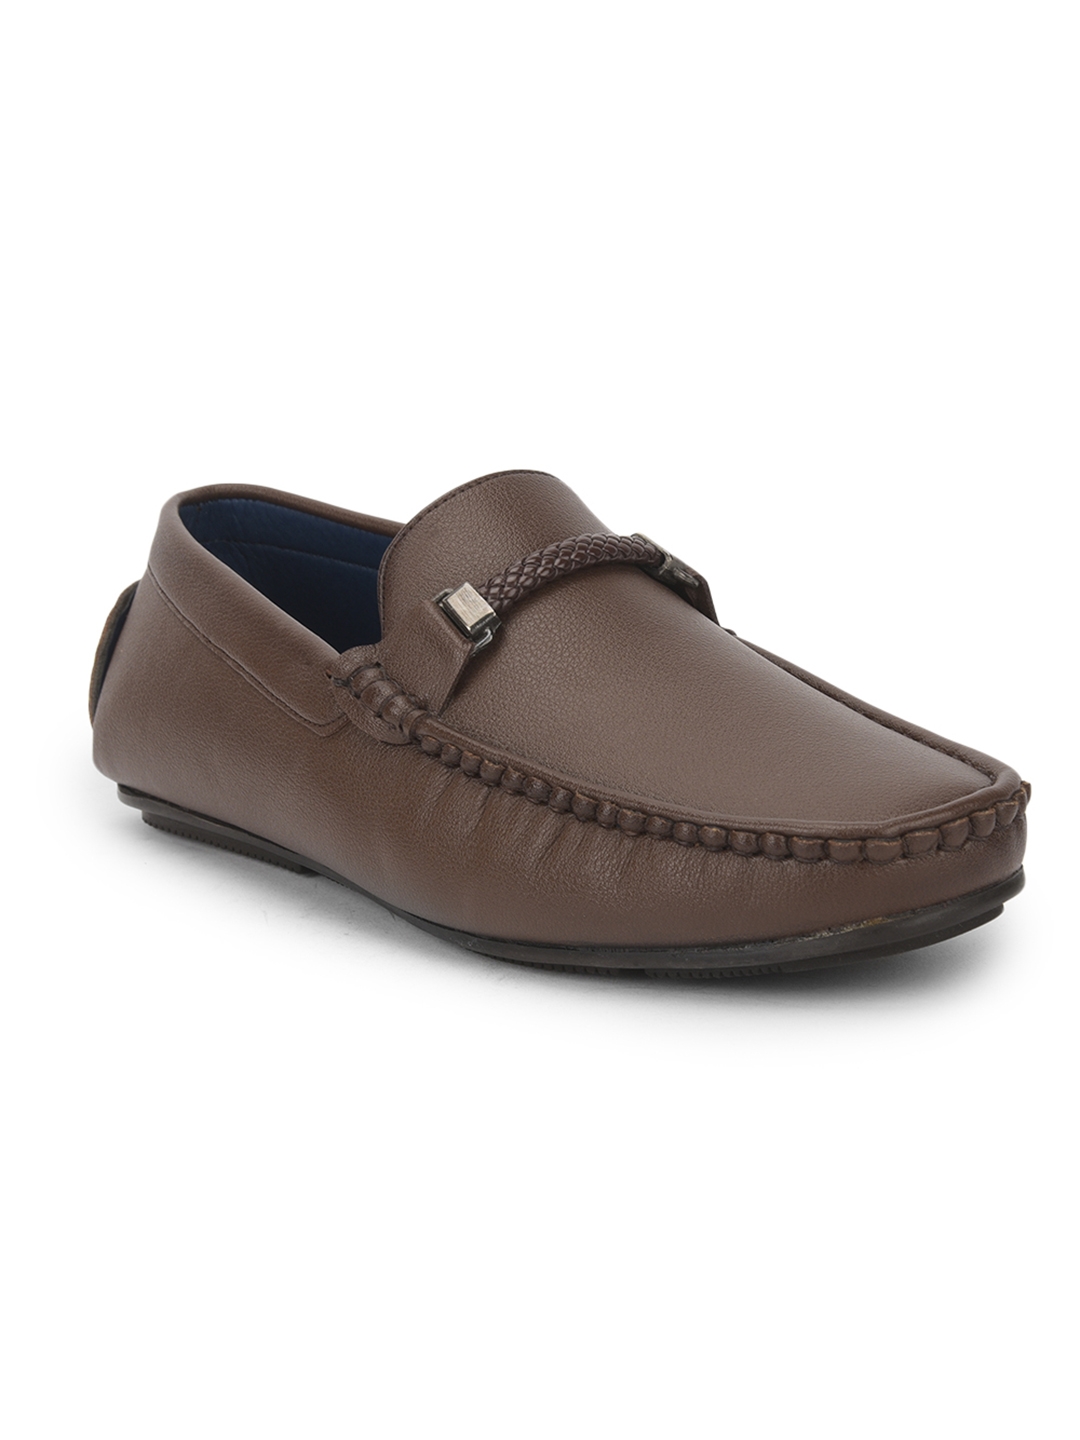 Liberty | Fortune by Liberty BROWN Formal Slip-ons AVNE-66 For :- MENS